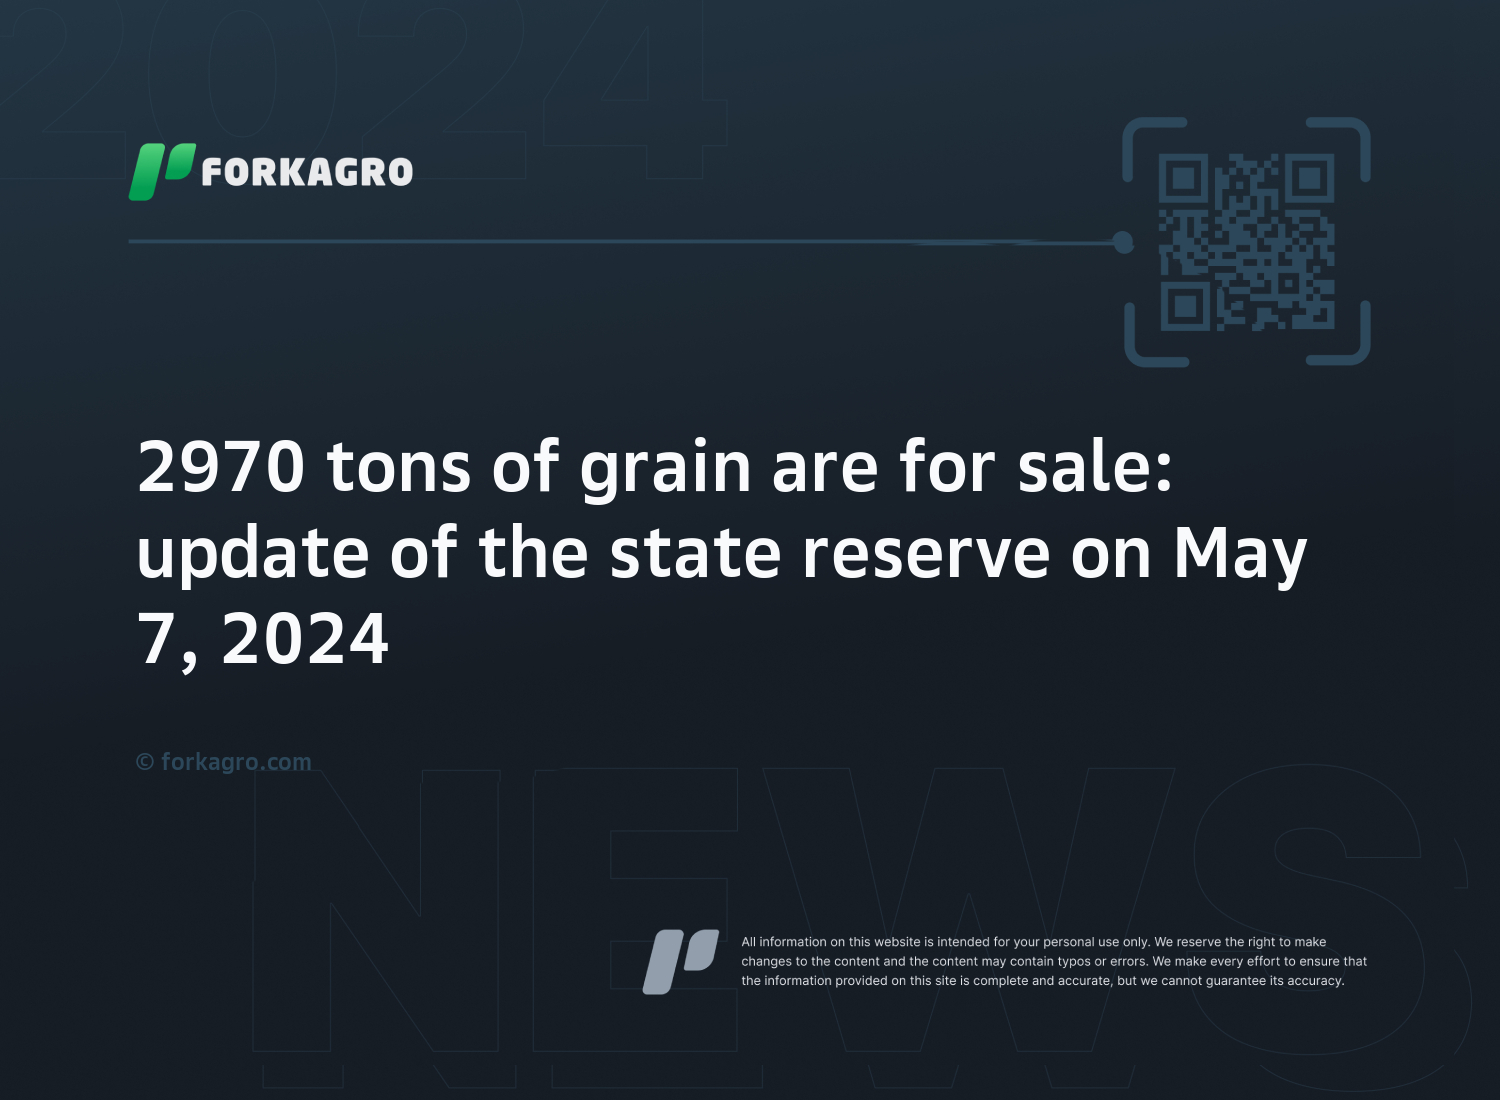 2970 tons of grain are for sale: update of the state reserve on May 7, 2024